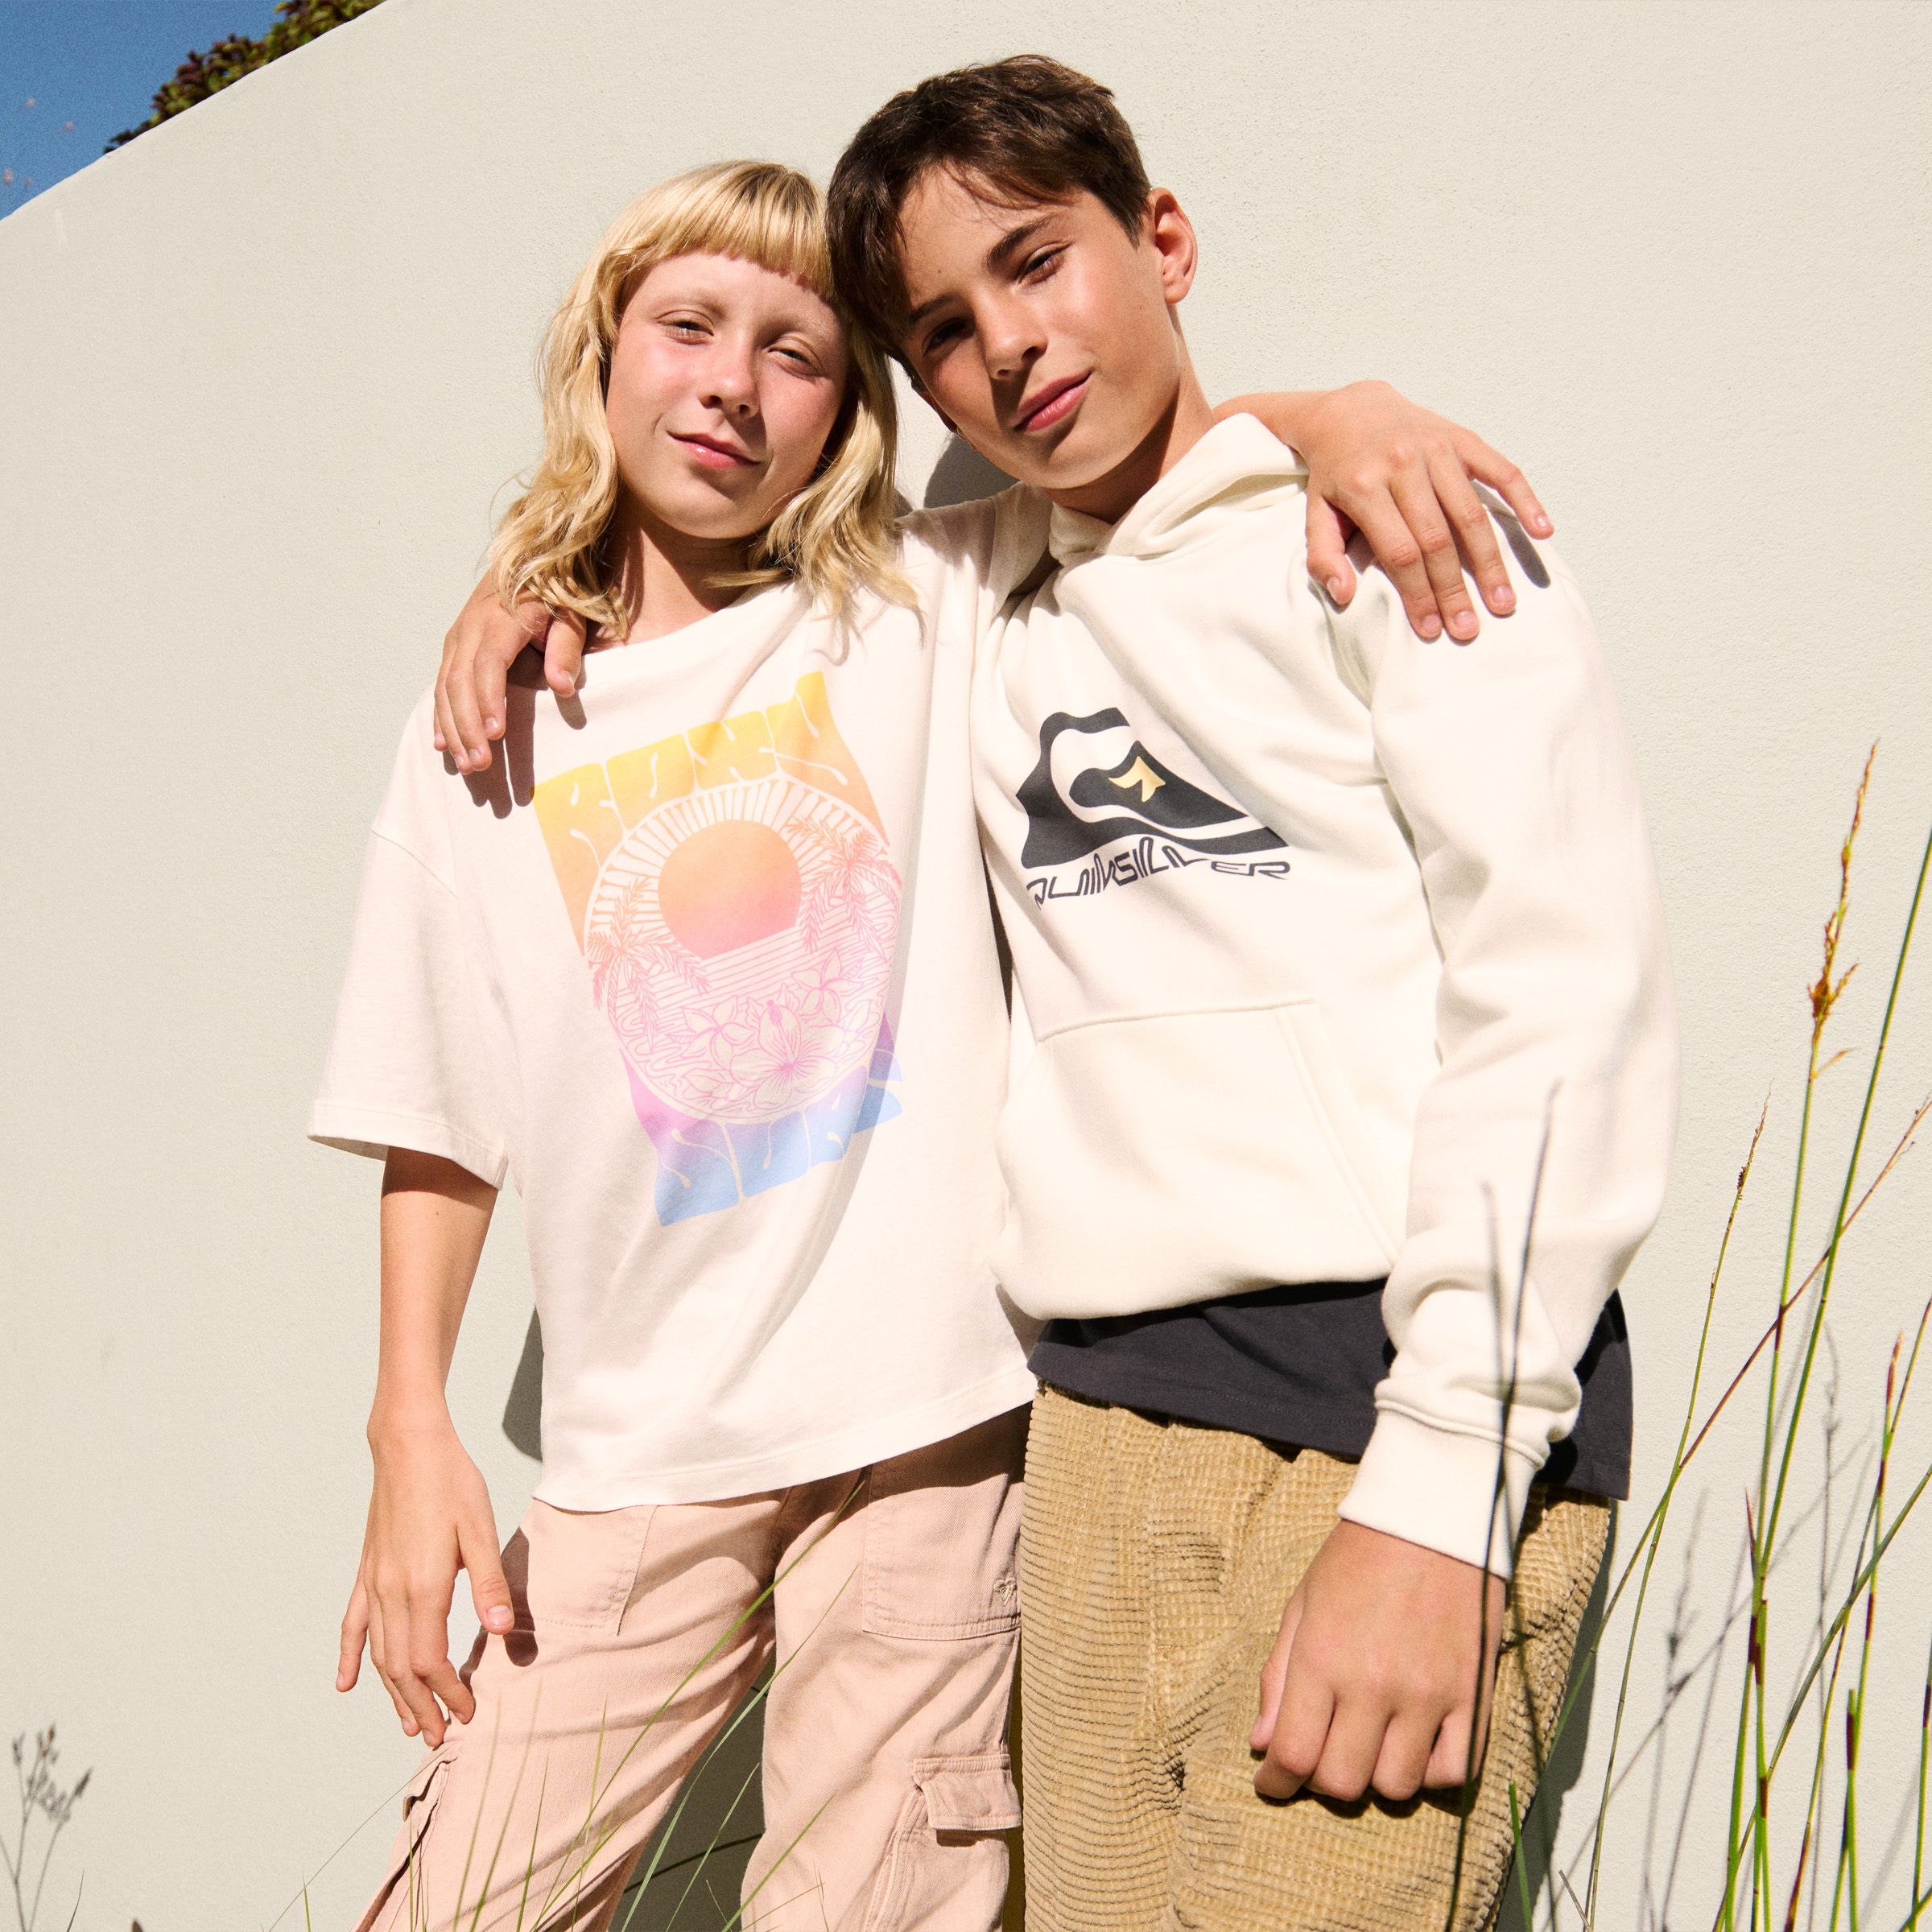 boy and a girl wearing surf / skate style clothing